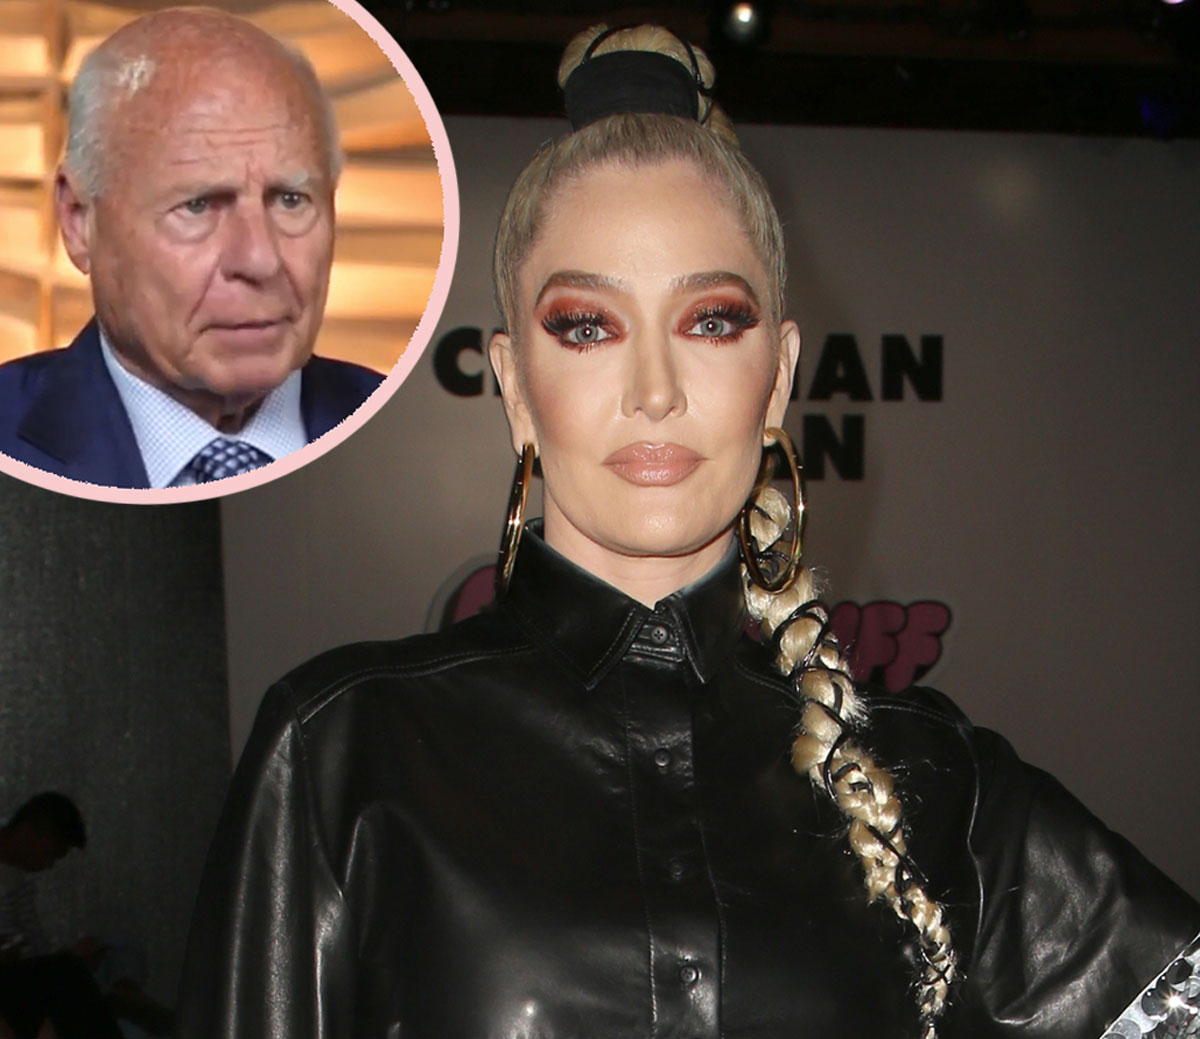 Erika Jayne and estranged husband Tom Girardi have been accused of fraud and embezzlement in new lawsuit